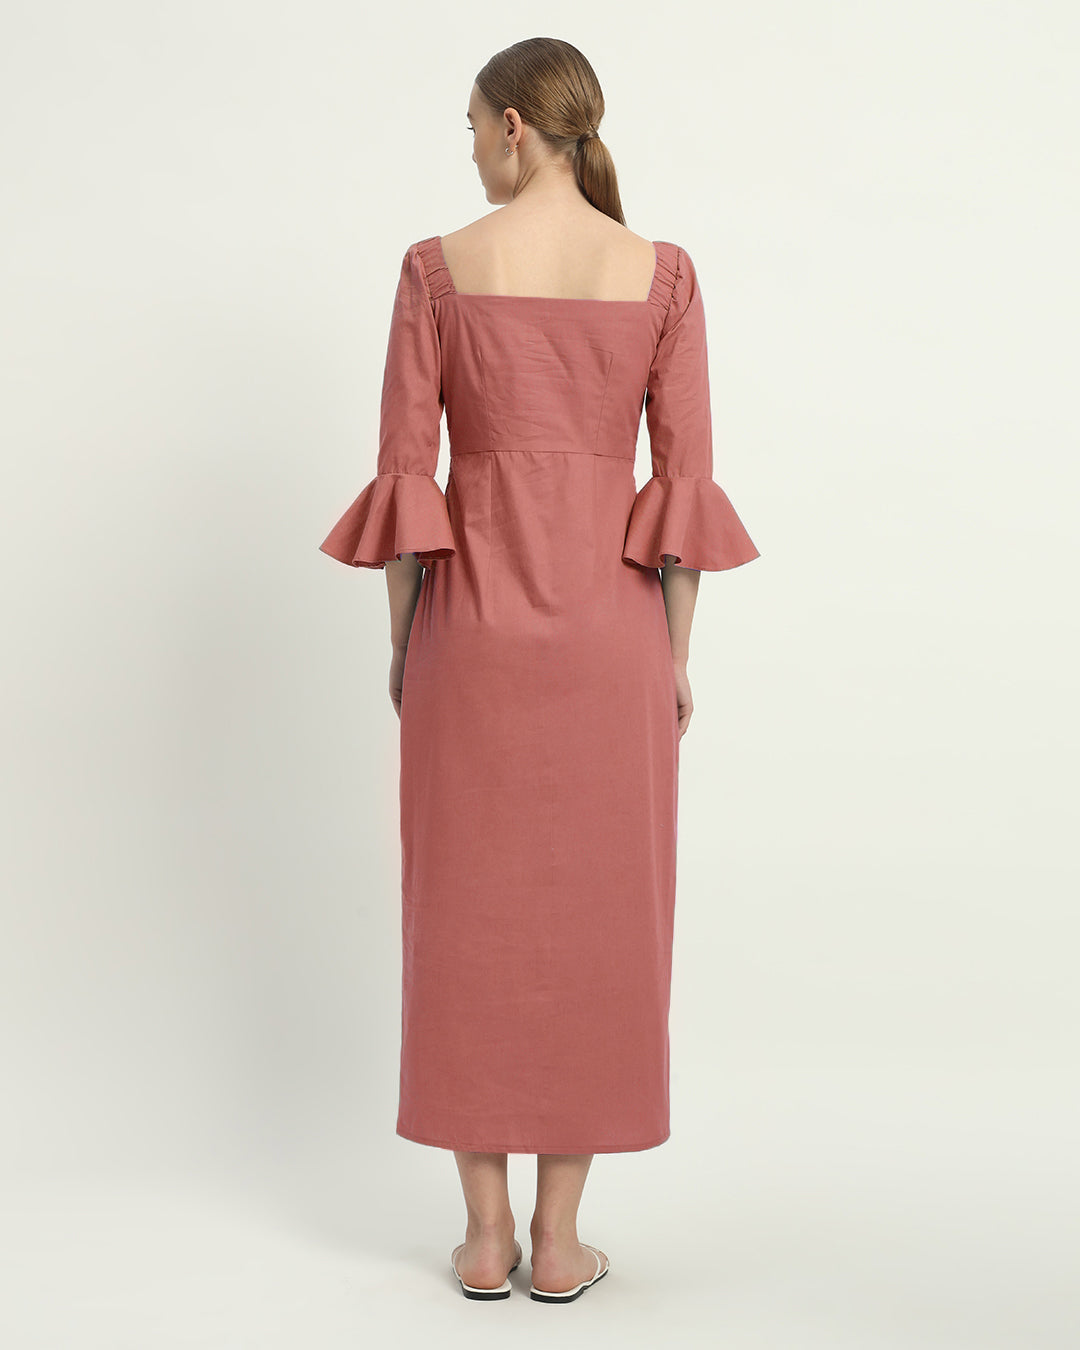 The Ivory Pink Rosendale Cotton Dress